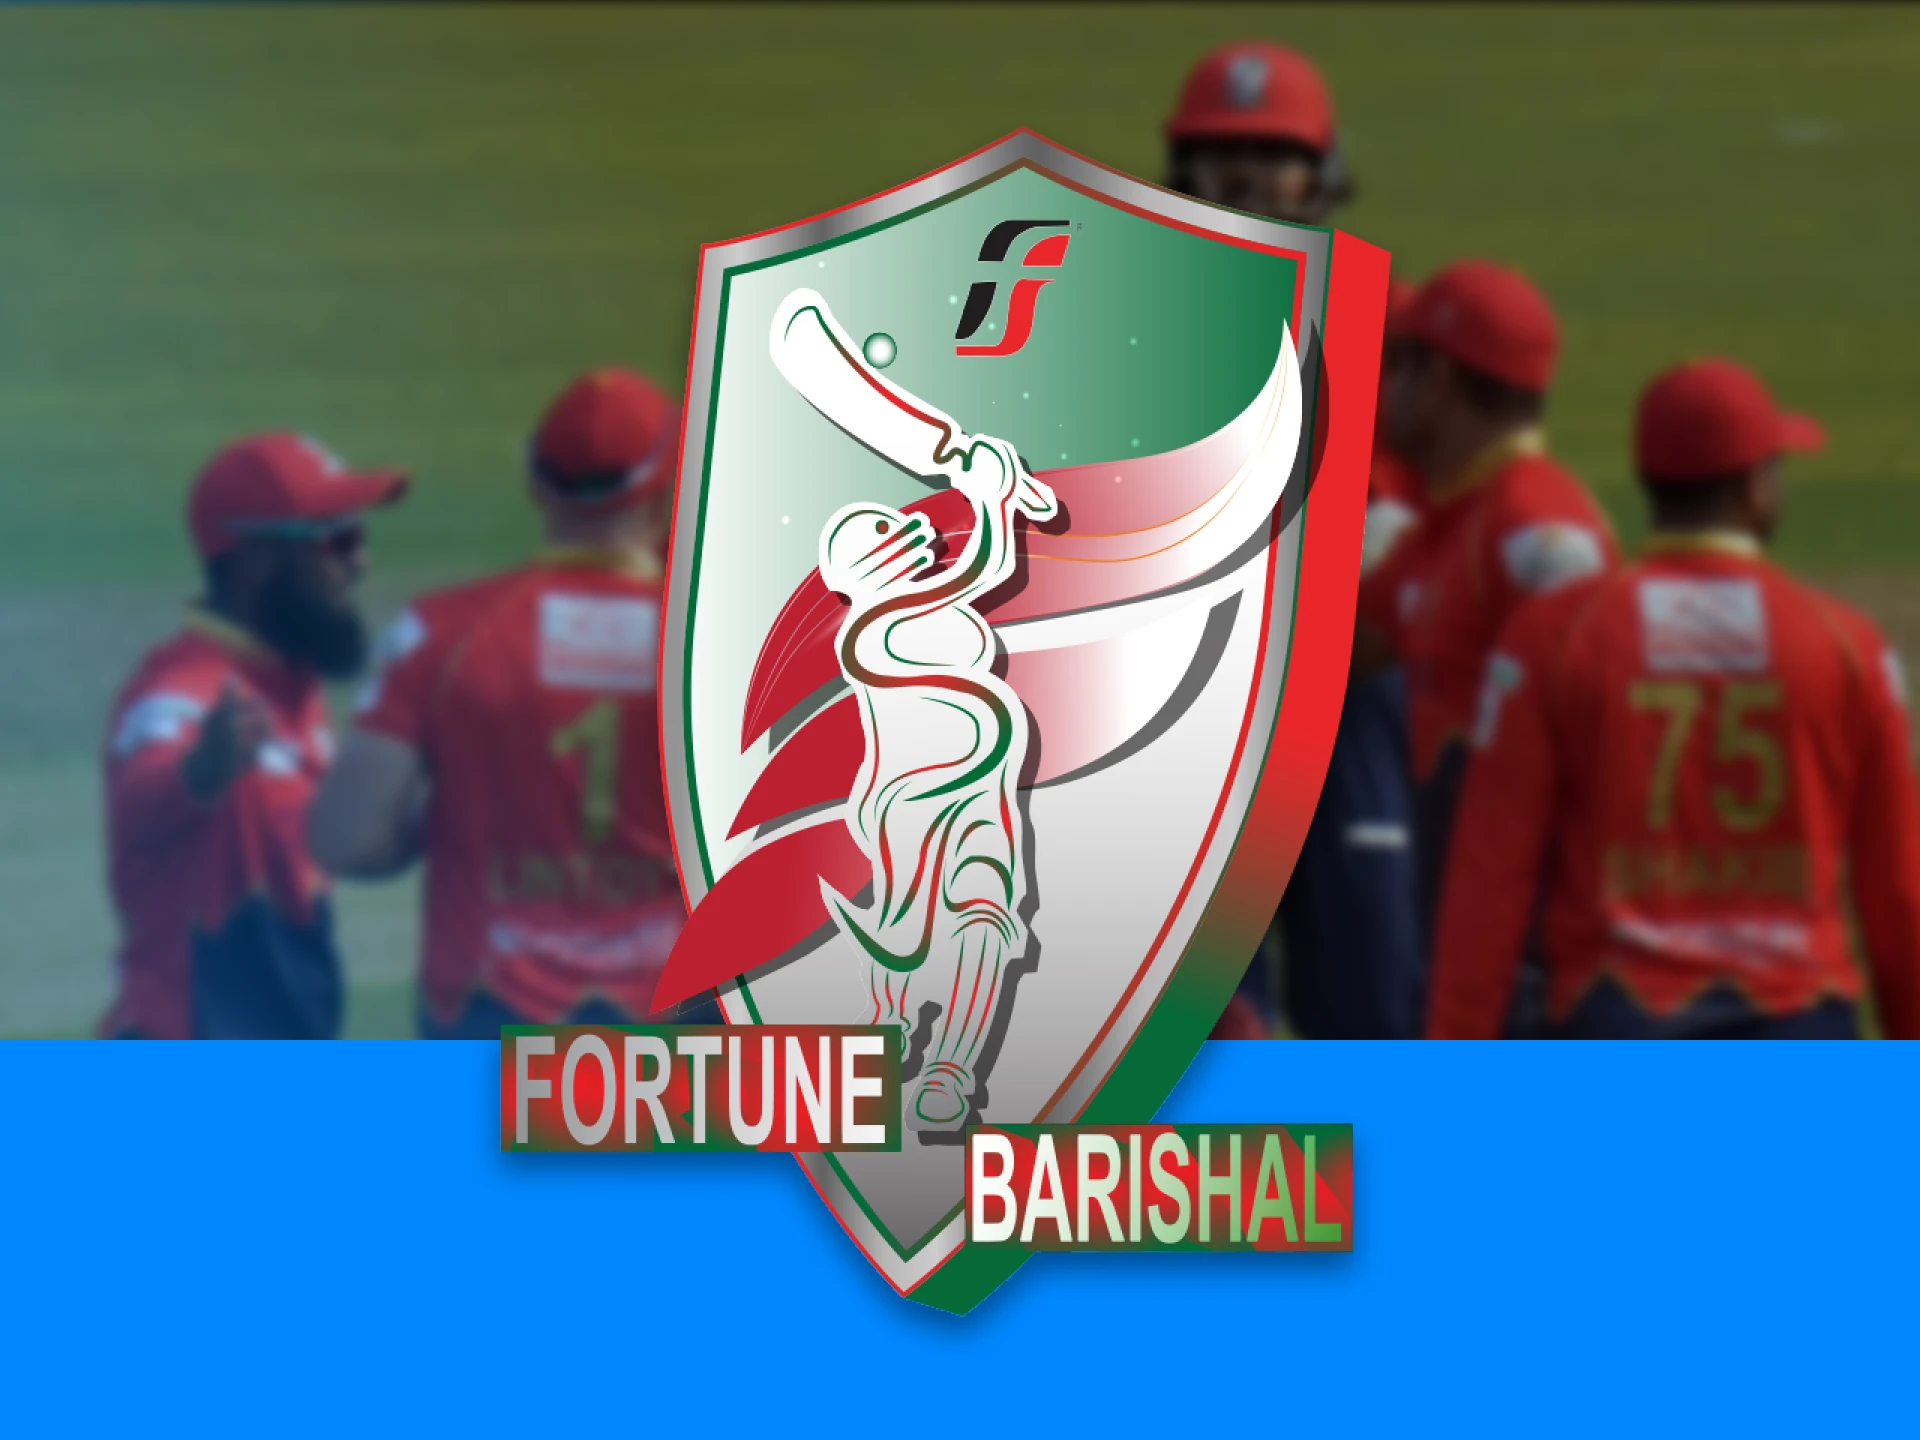 The Fortune Barishal team joined the BPL in 2012.